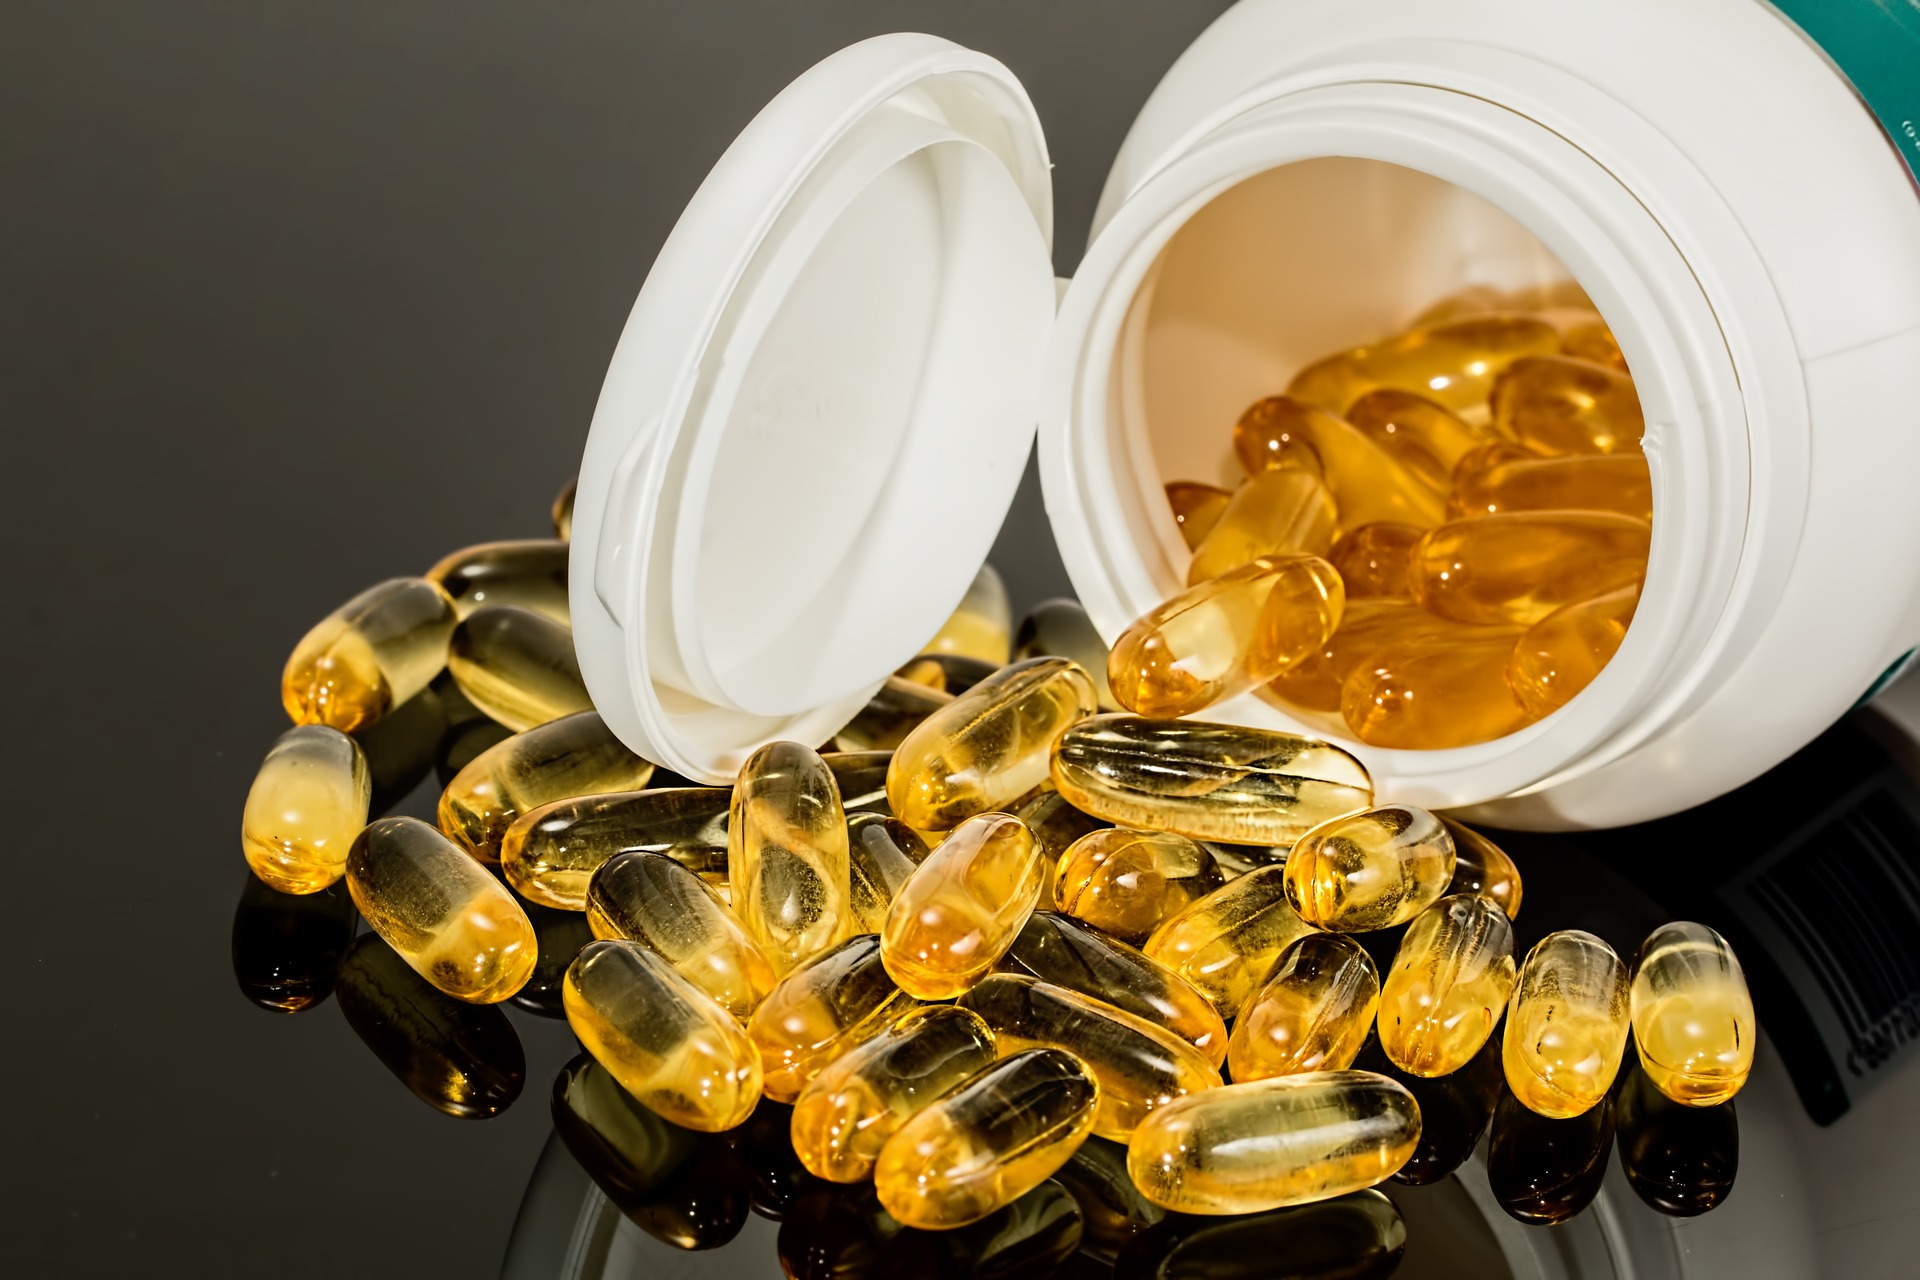 Synthetic Or Natural Supplements? These Are The Pros And Cons